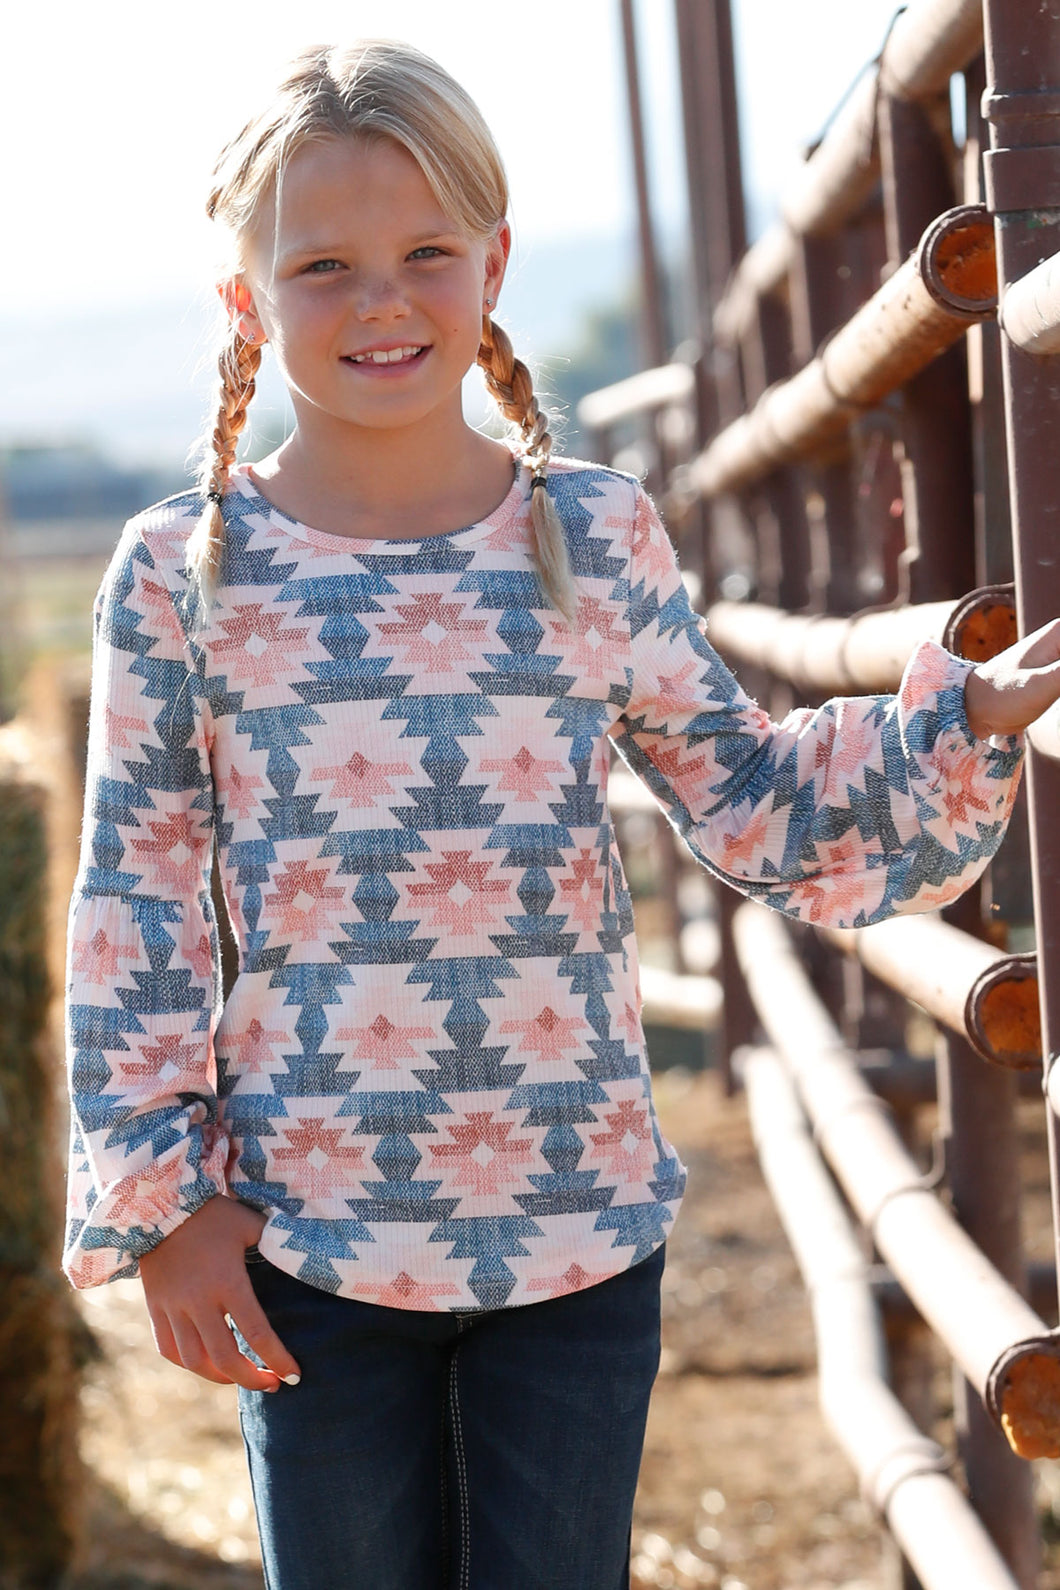 Pard's Western Shop Cruel Girl Navy/Pink Aztec Pullover Knit Top for Girls